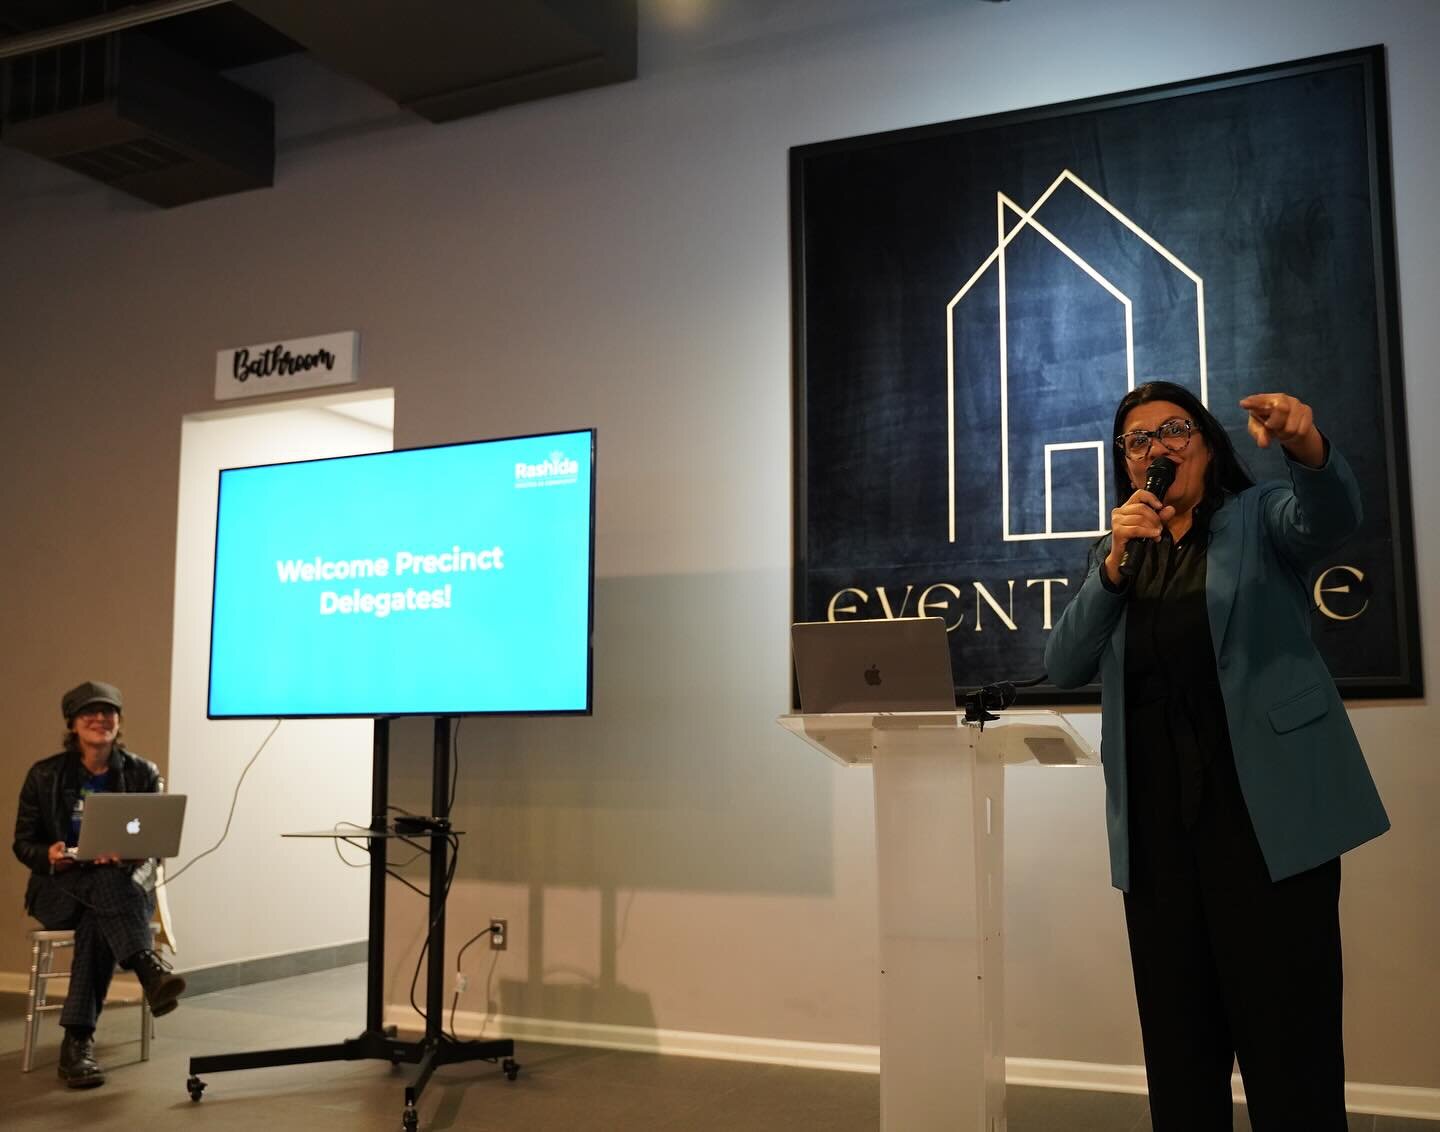 Special thanks to @rashidatlaib and her team for picking us &amp; making &ldquo;The Event House&rdquo; 🏠 your event home. Great event you left the room motivated with your vision. We&rsquo;re excited to see what the future holds. 

This event was se